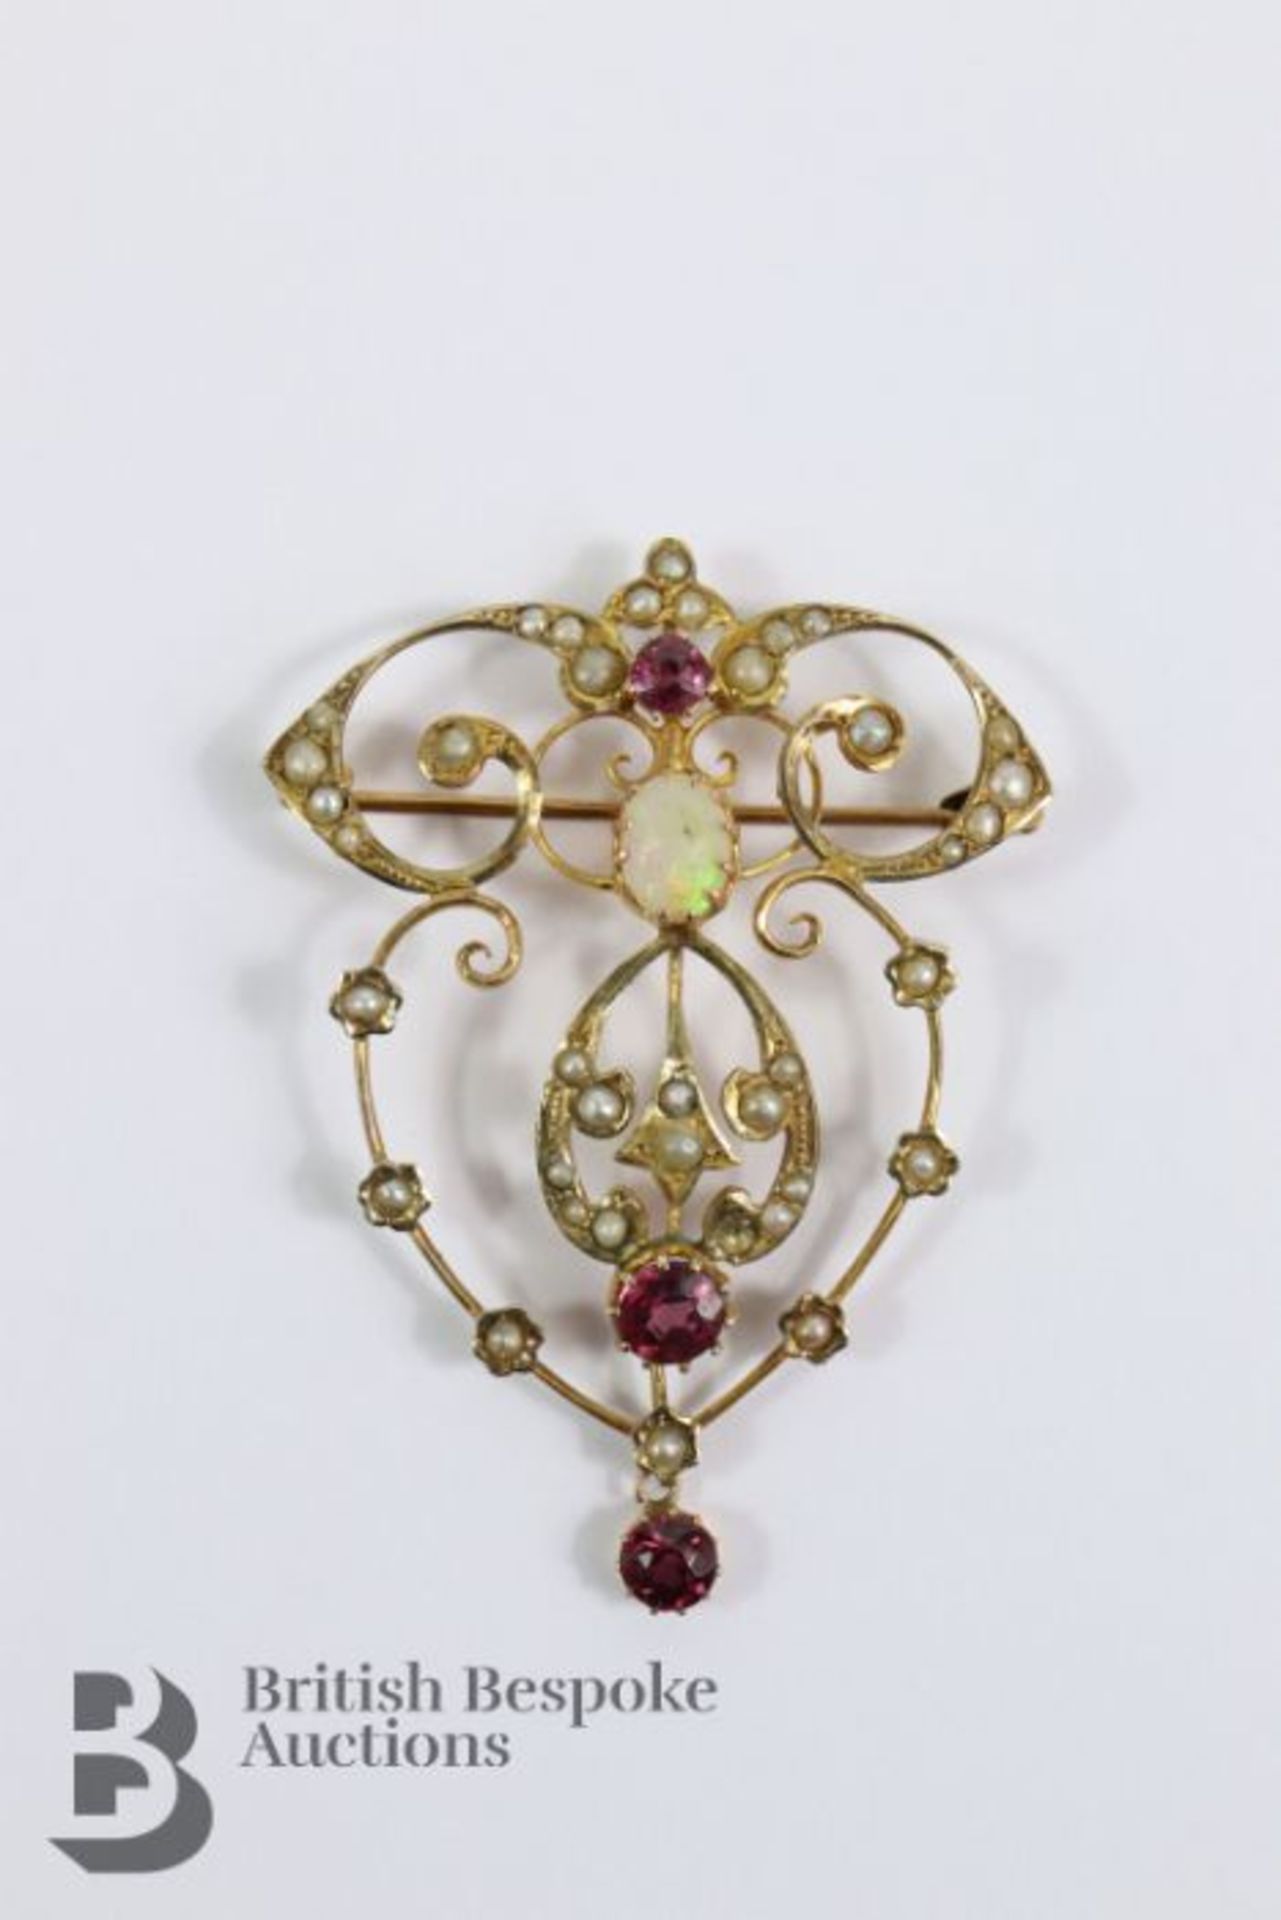 Edwardian 9ct Gold Tourmaline and Opal Brooch - Image 2 of 2